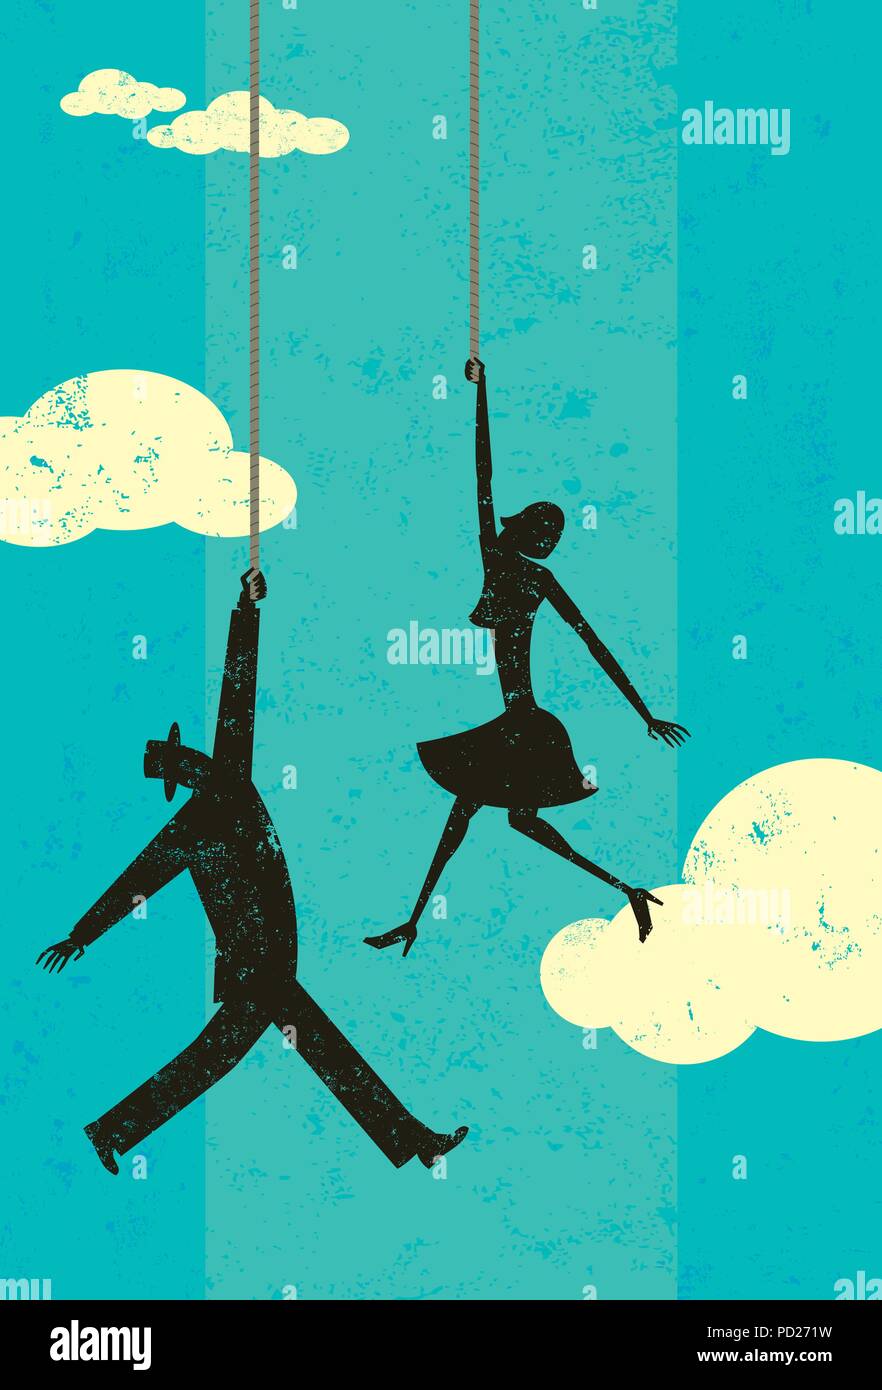 End of the rope A man and woman in the sky hanging on the end of their ropes. Stock Vector